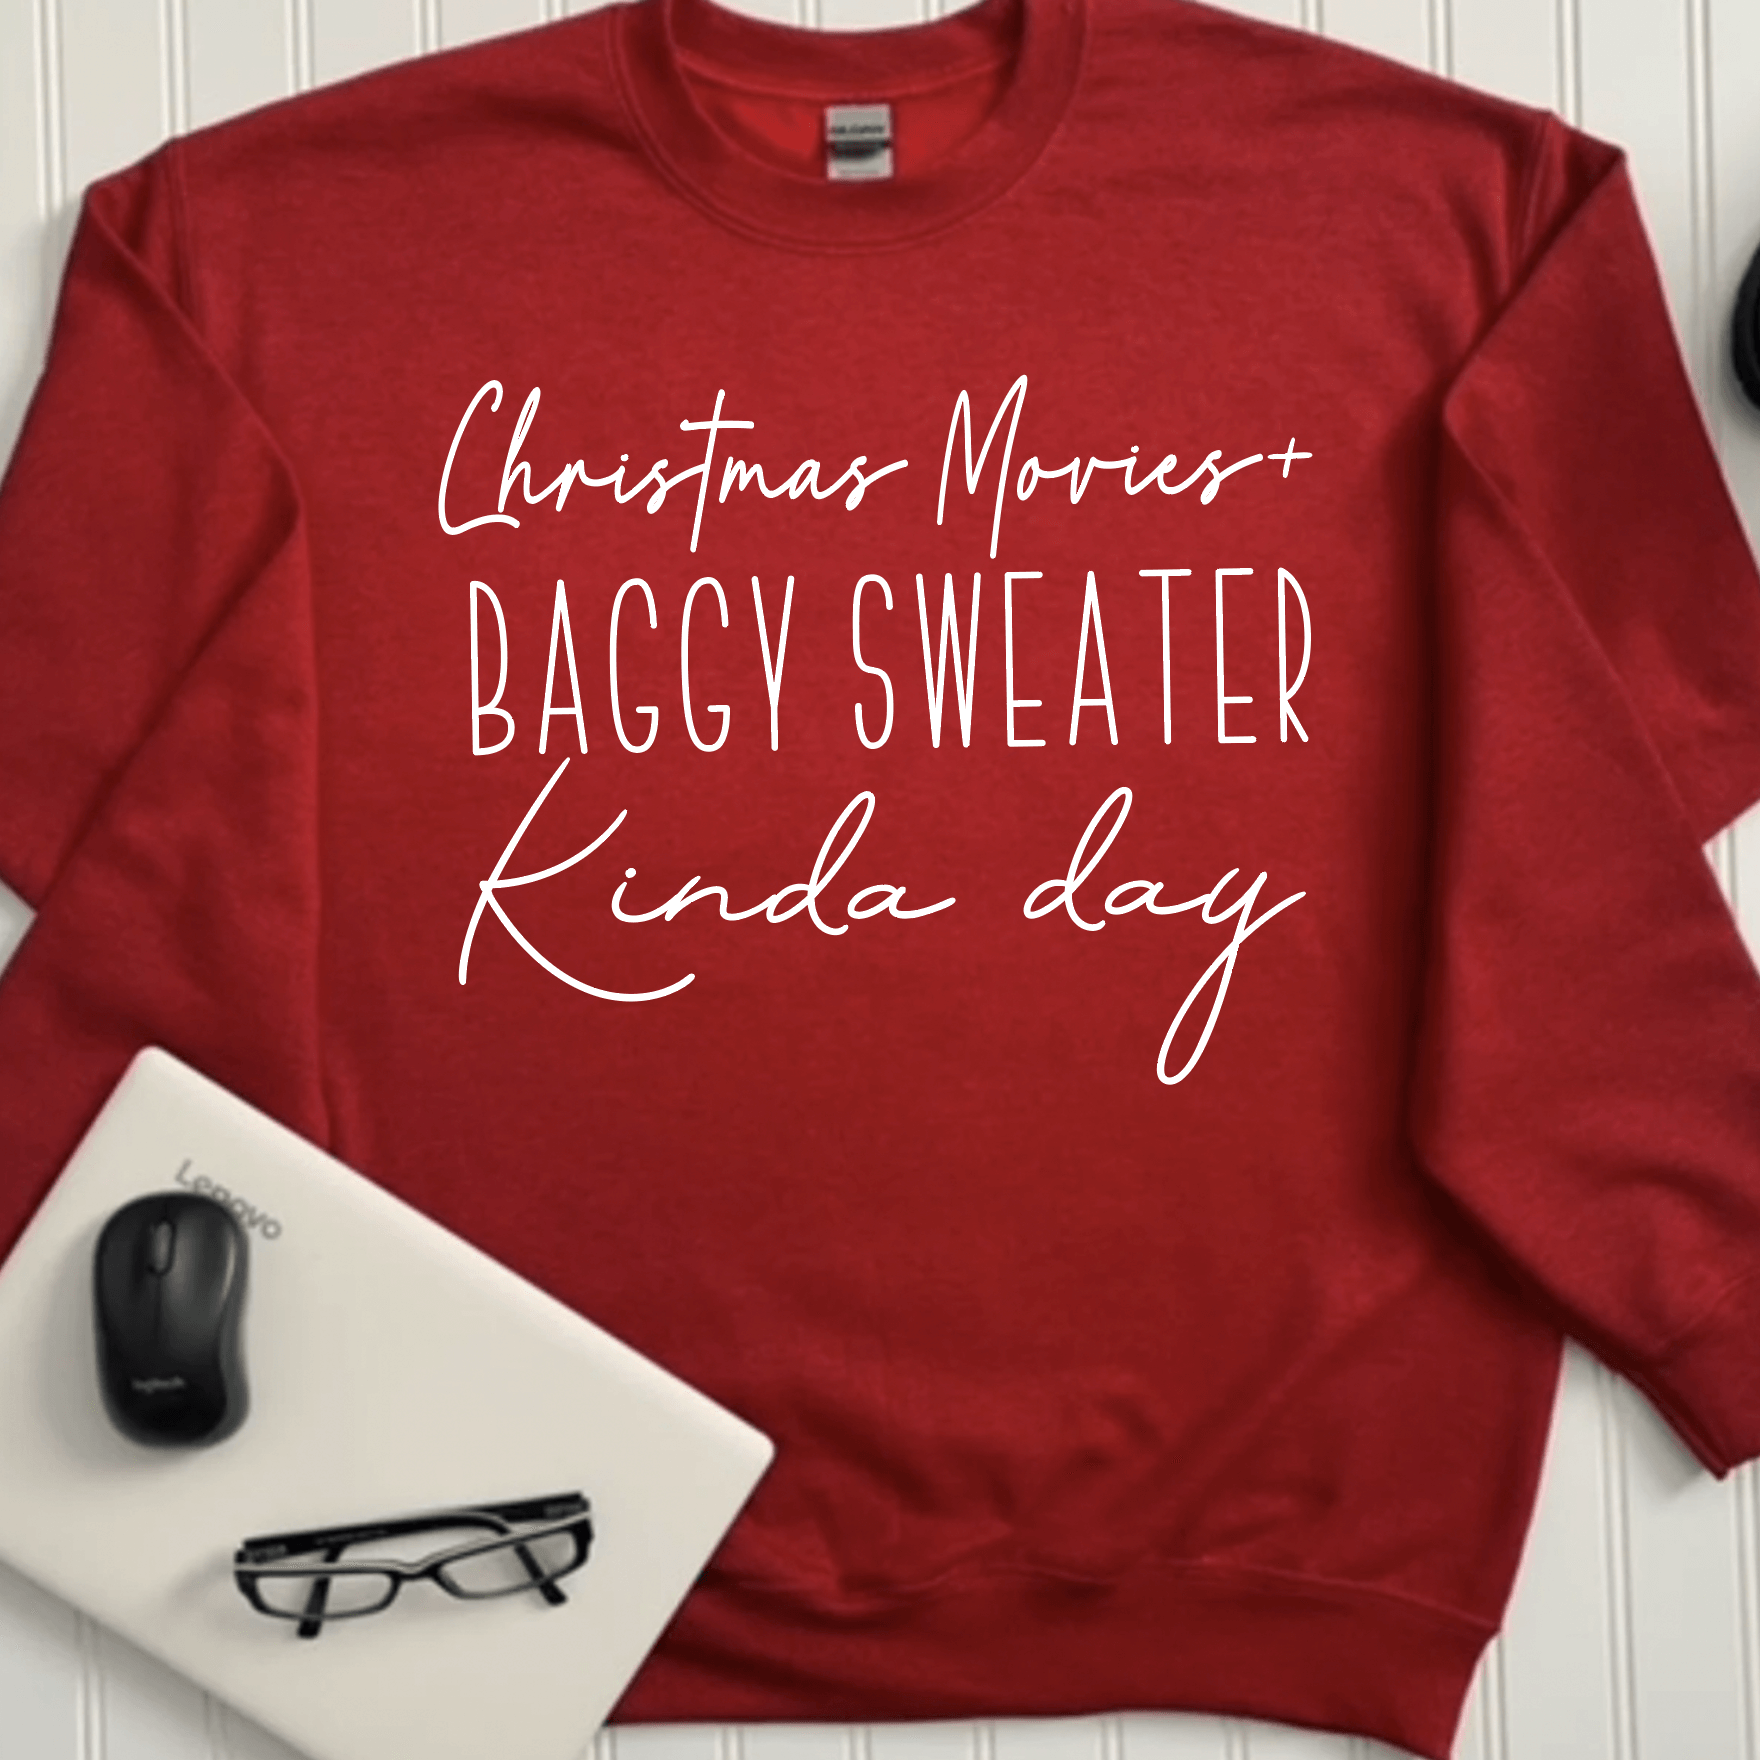 Christmas Movies + Baggy Sweater Kinda Day - Signastyle Boutique